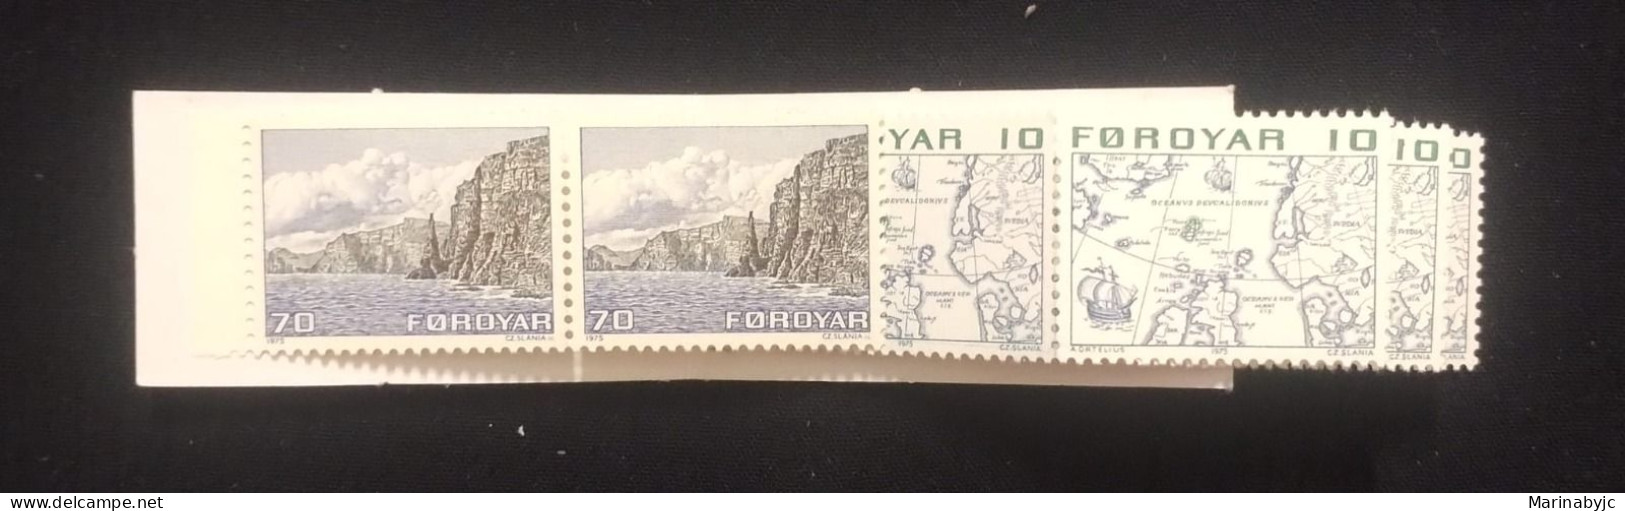 C) 2, 5. 1975 DENMARK. FEROES ISLANDS ROCK FORMATIONS AND MAPS, MULTIPLE STAMPS. MINT - Usati